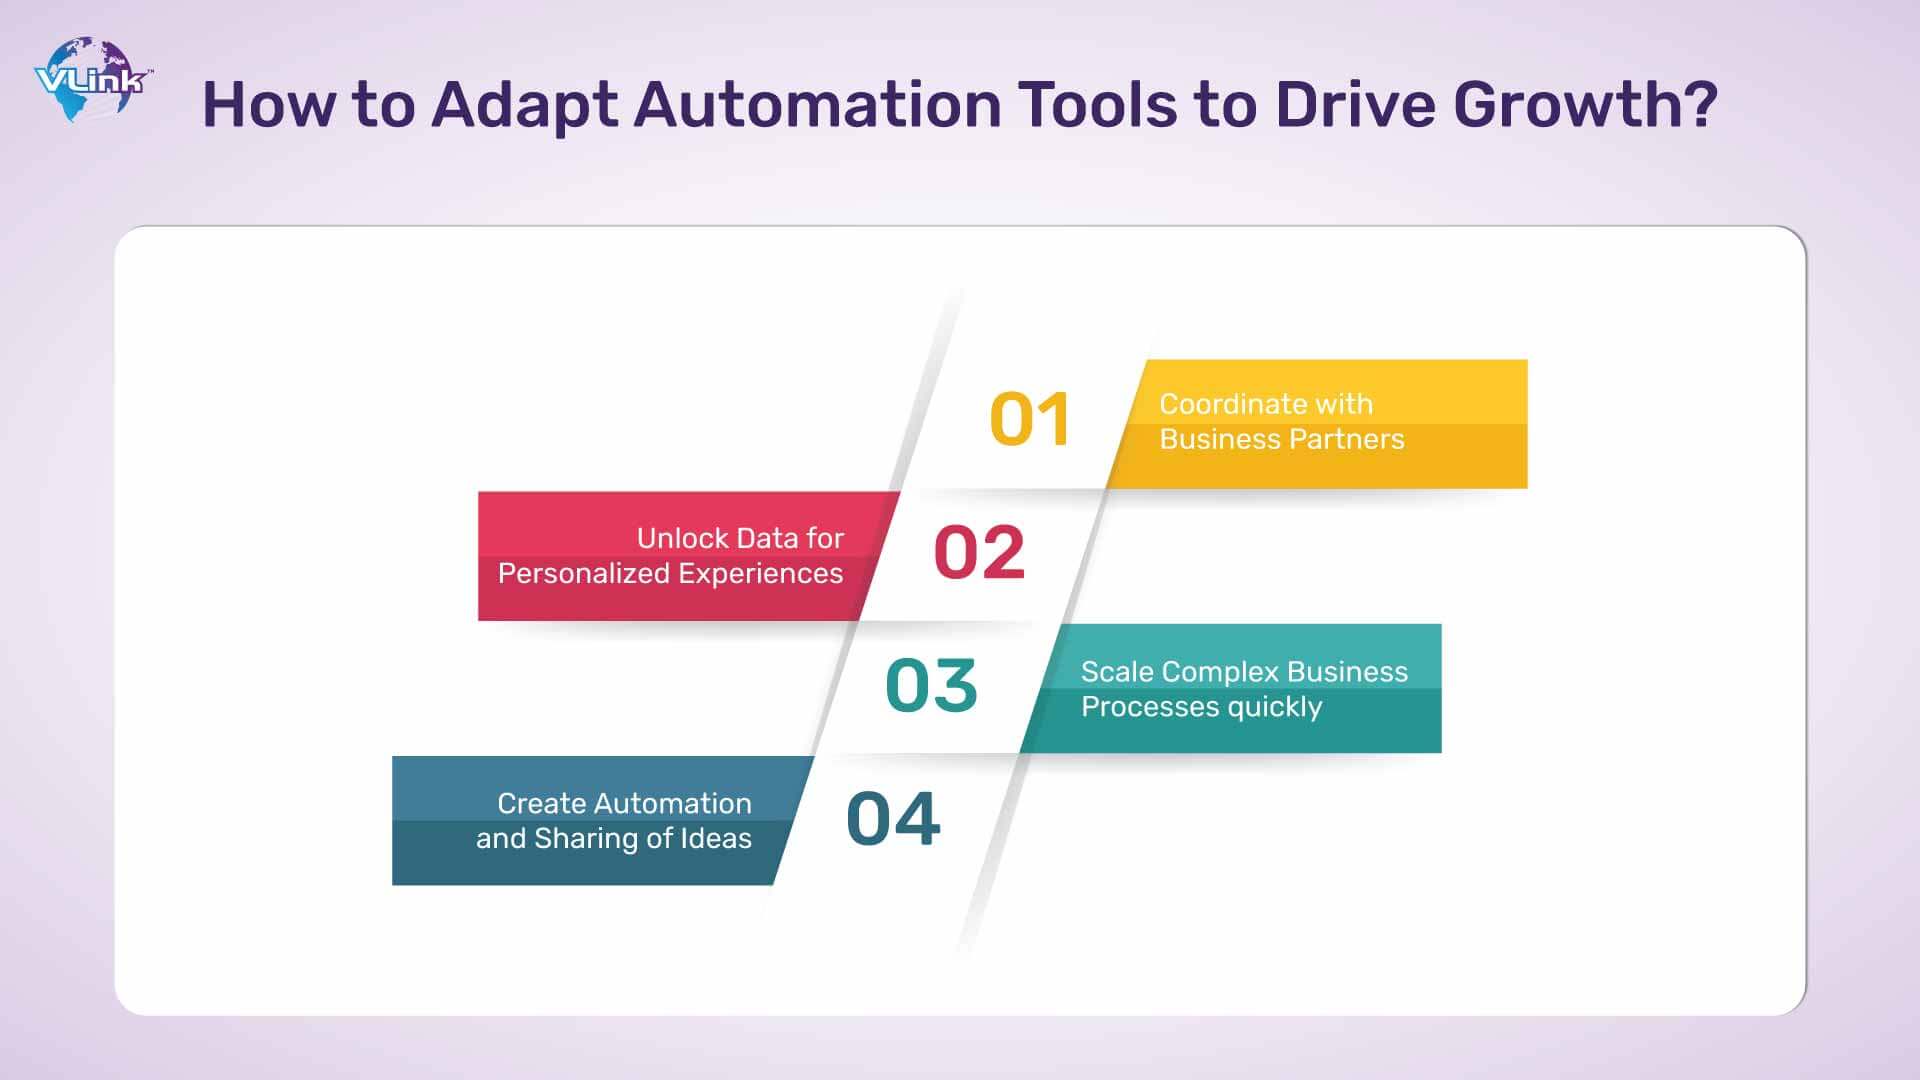 How to Adopt Automation Tools to Drive Growth